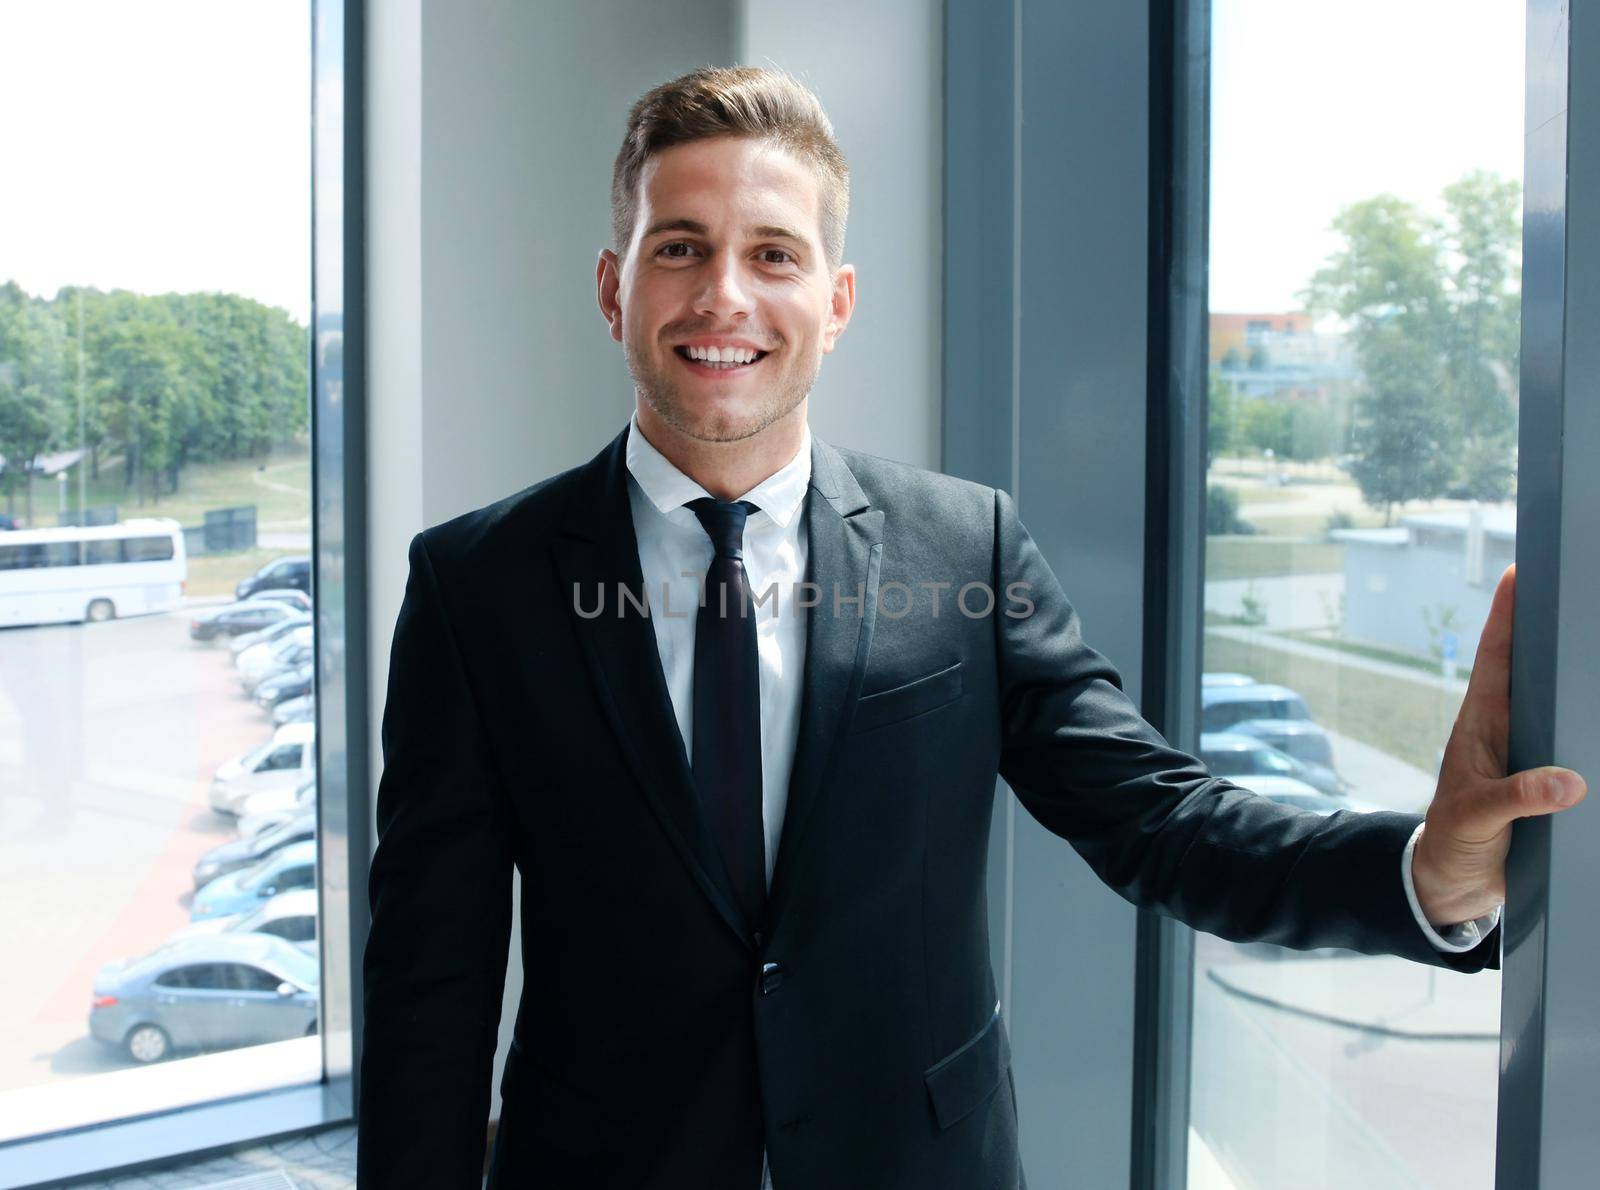 Young handsome businessman smiling in an office environment by tsyhun